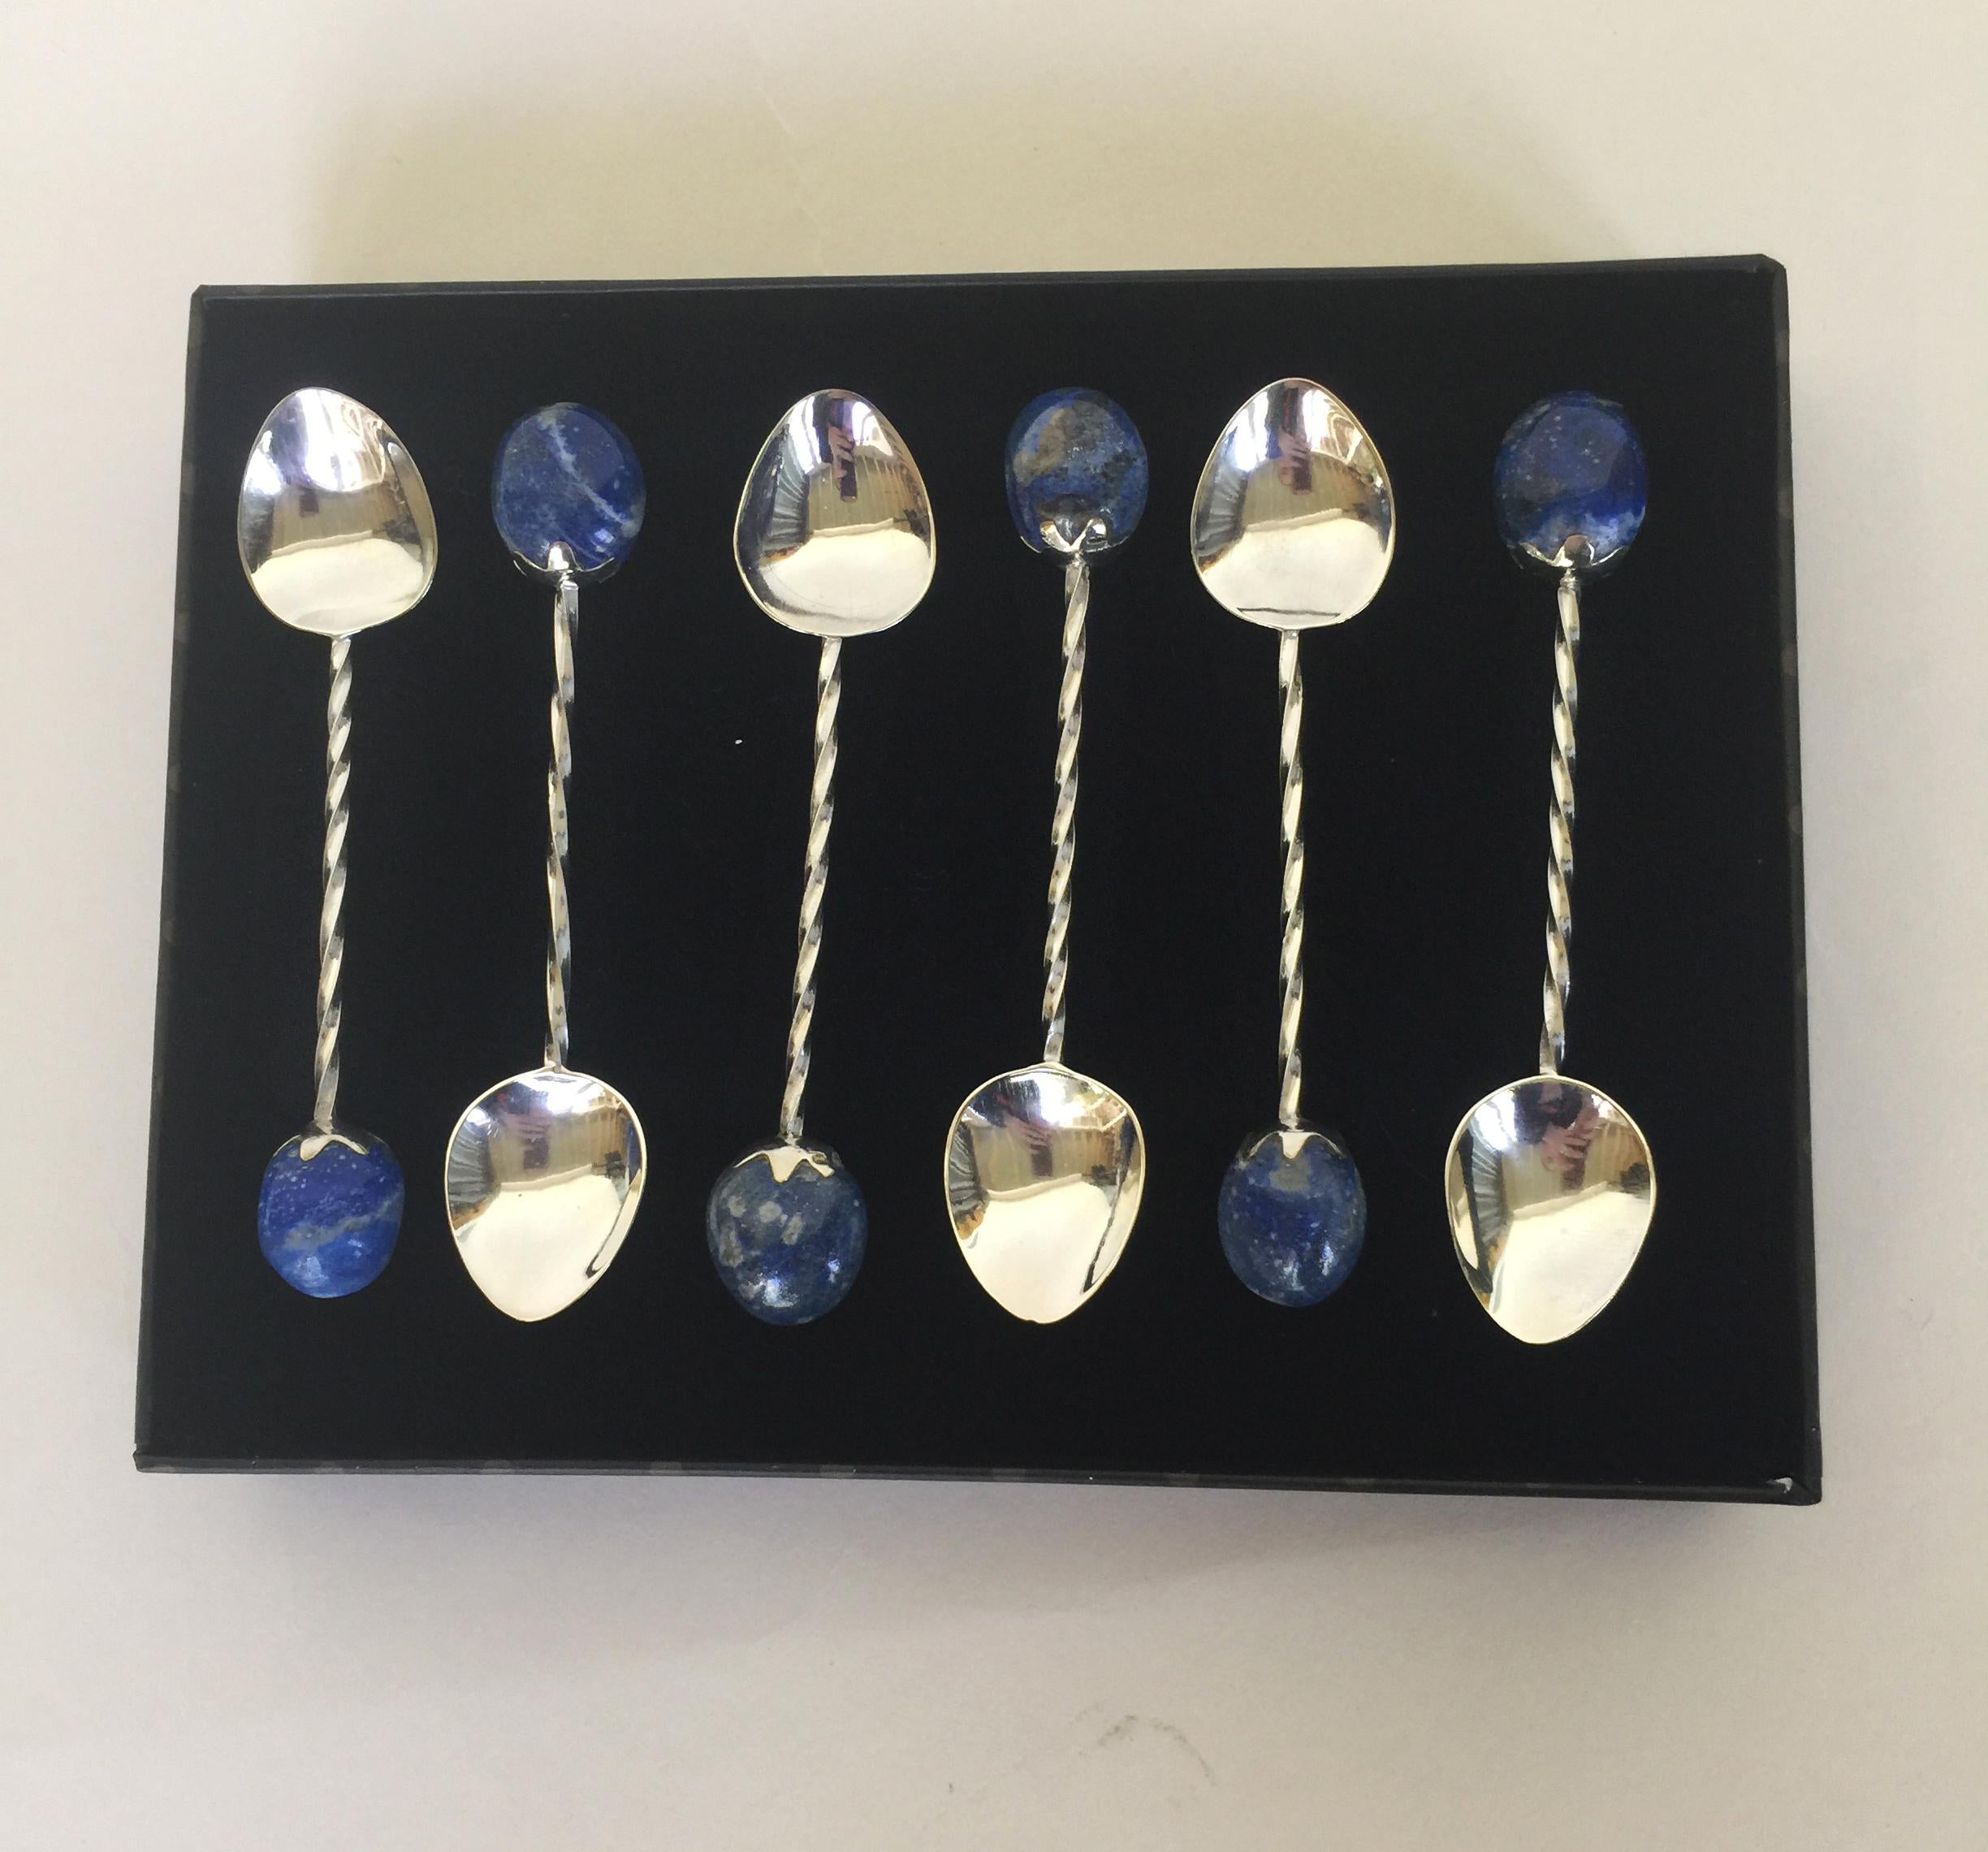 This set of 6 rhodium-plated sterling silver teaspoons with lapis lazuli stones are elegant, with spiral handles. These vintage spoons were re-imagined by Marina J.  A polished large lapis lazuli stone is set at the end, giving each spoon a unique